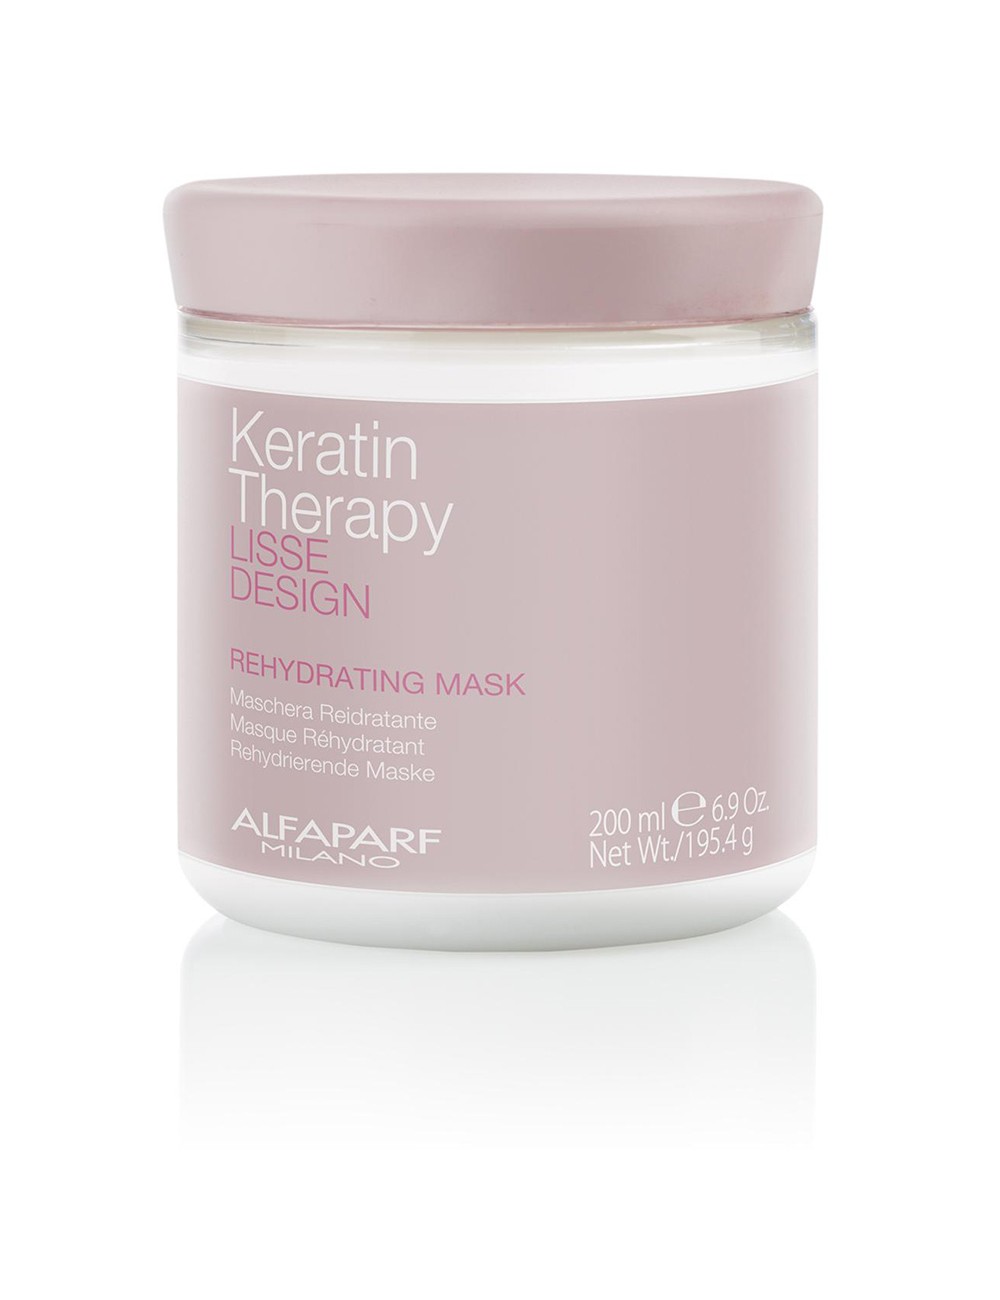 LISSE DESIGN KERATIN THERAPY reMasque hydratant 200 ml